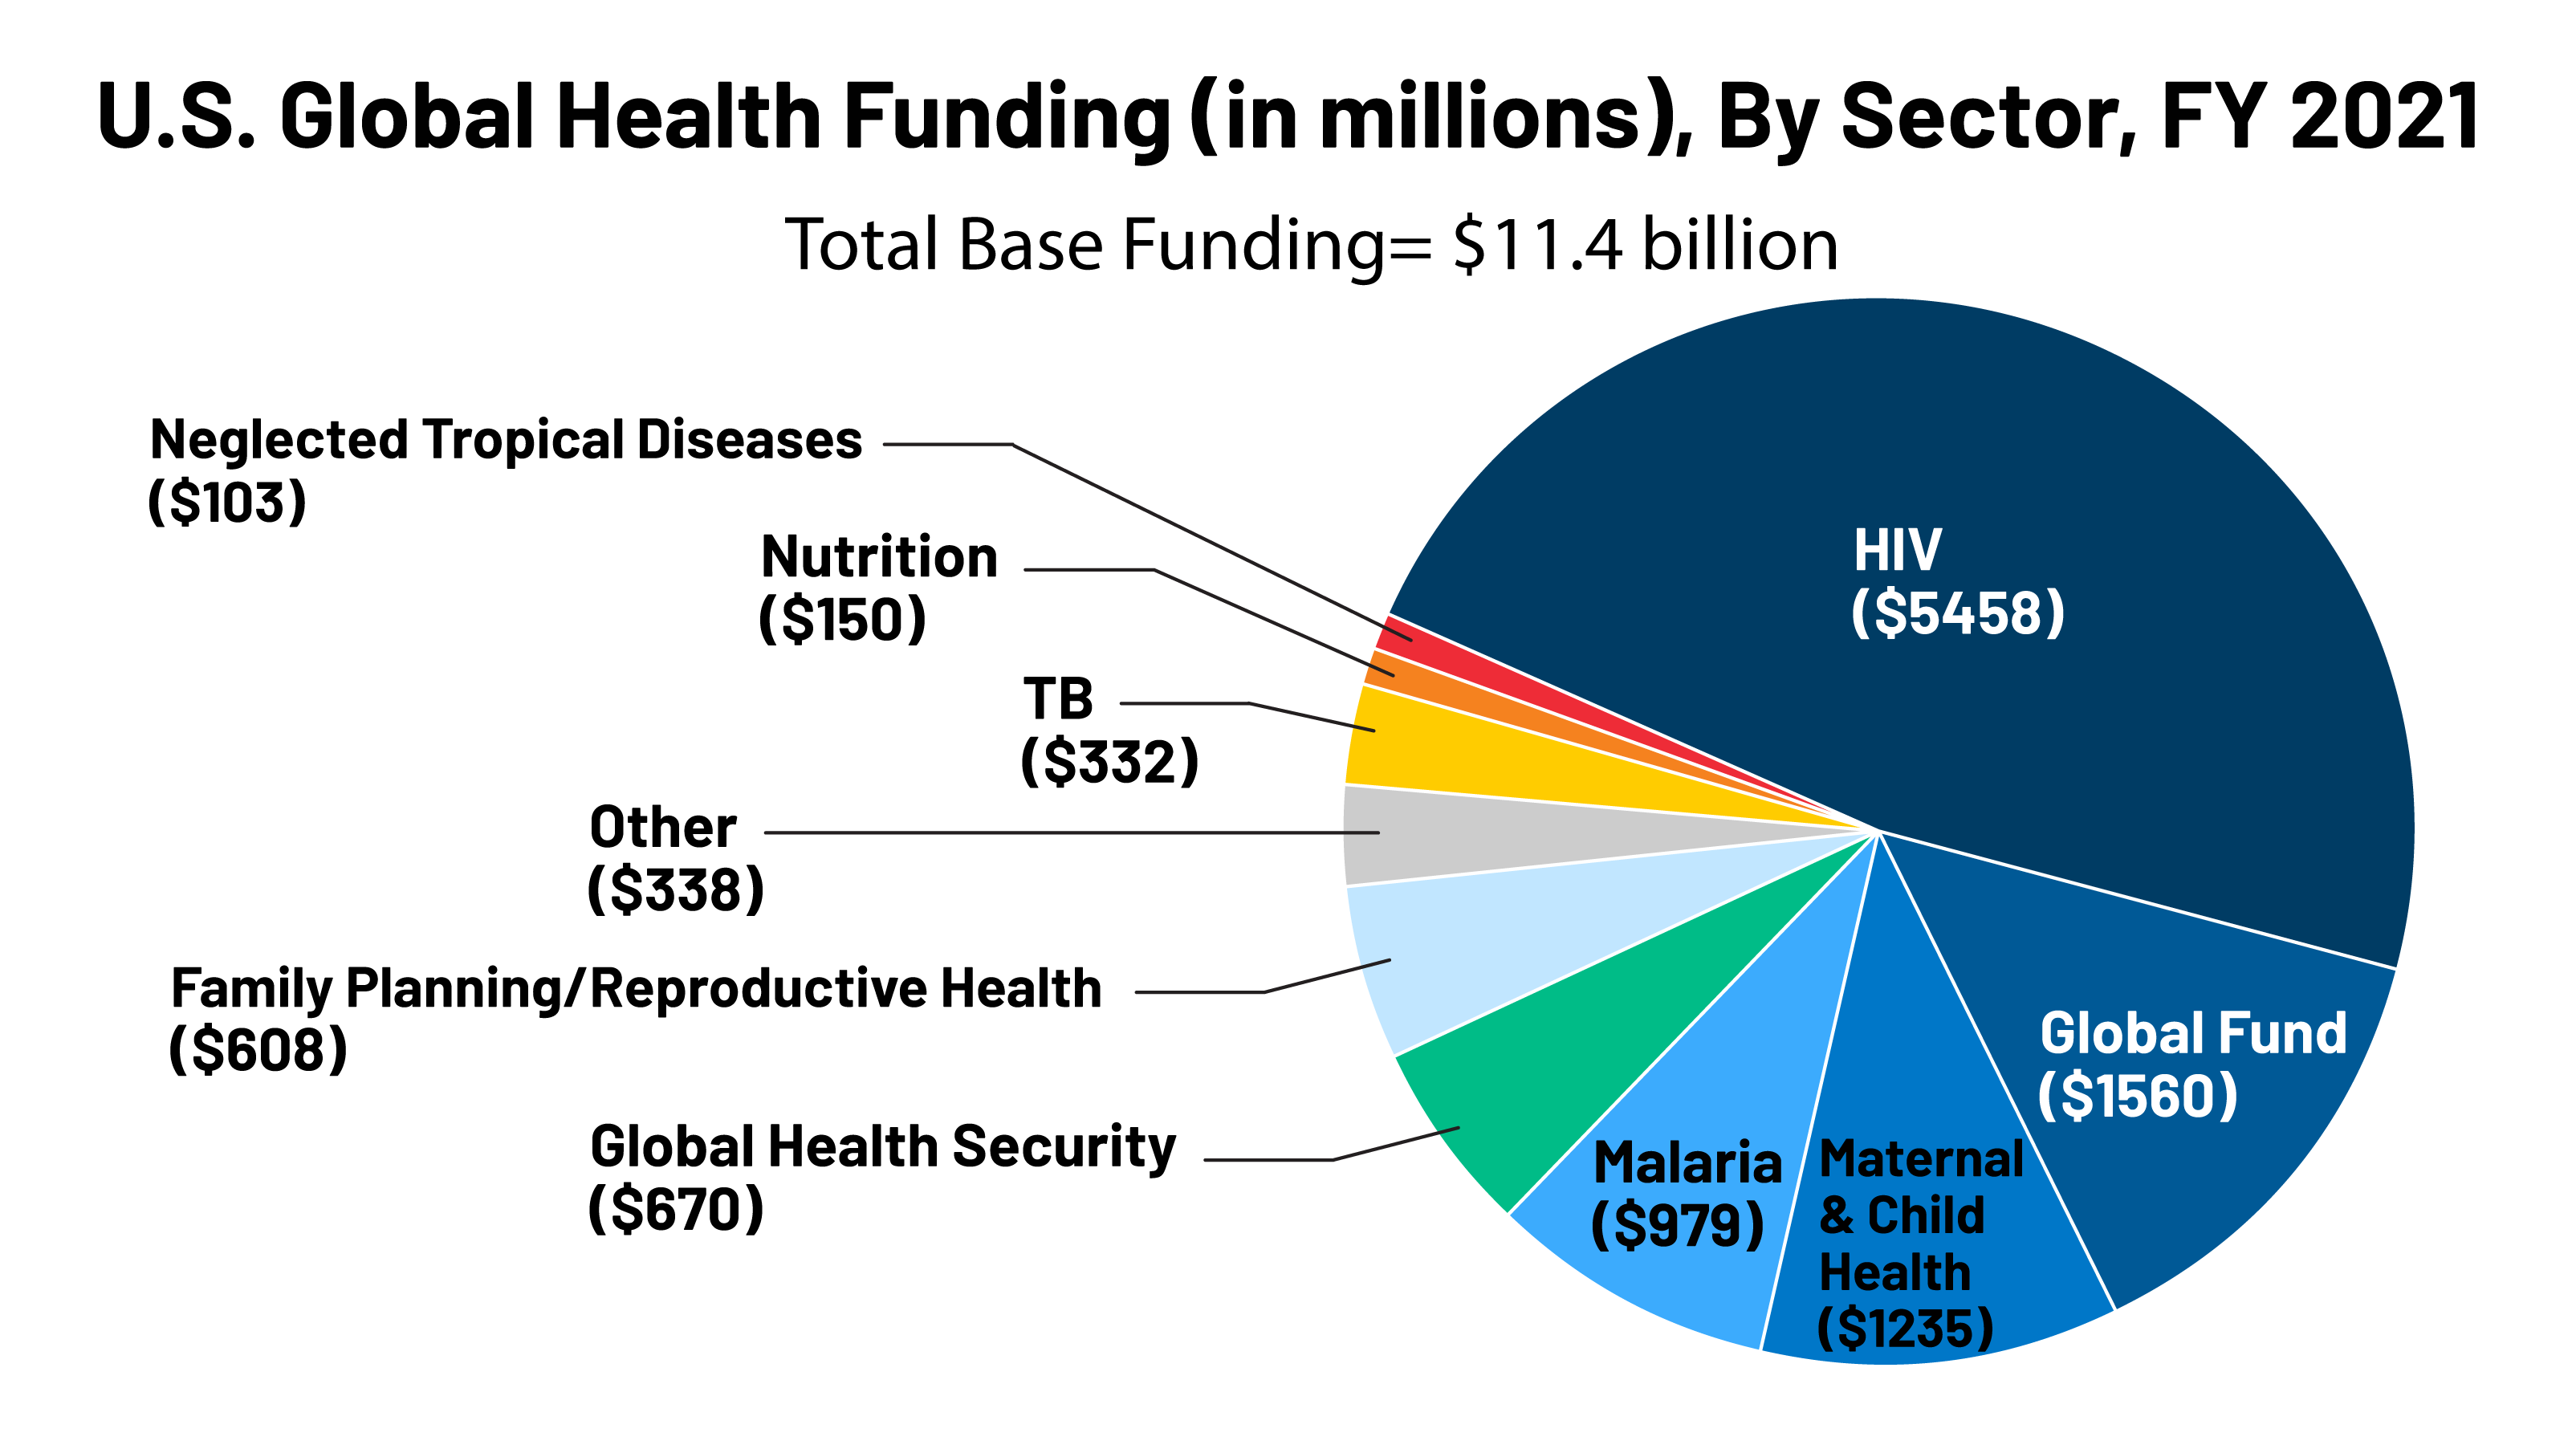 FEATURE U.S. Global Health Funding In Millions By Sector FY 2021 1 ?resize=768